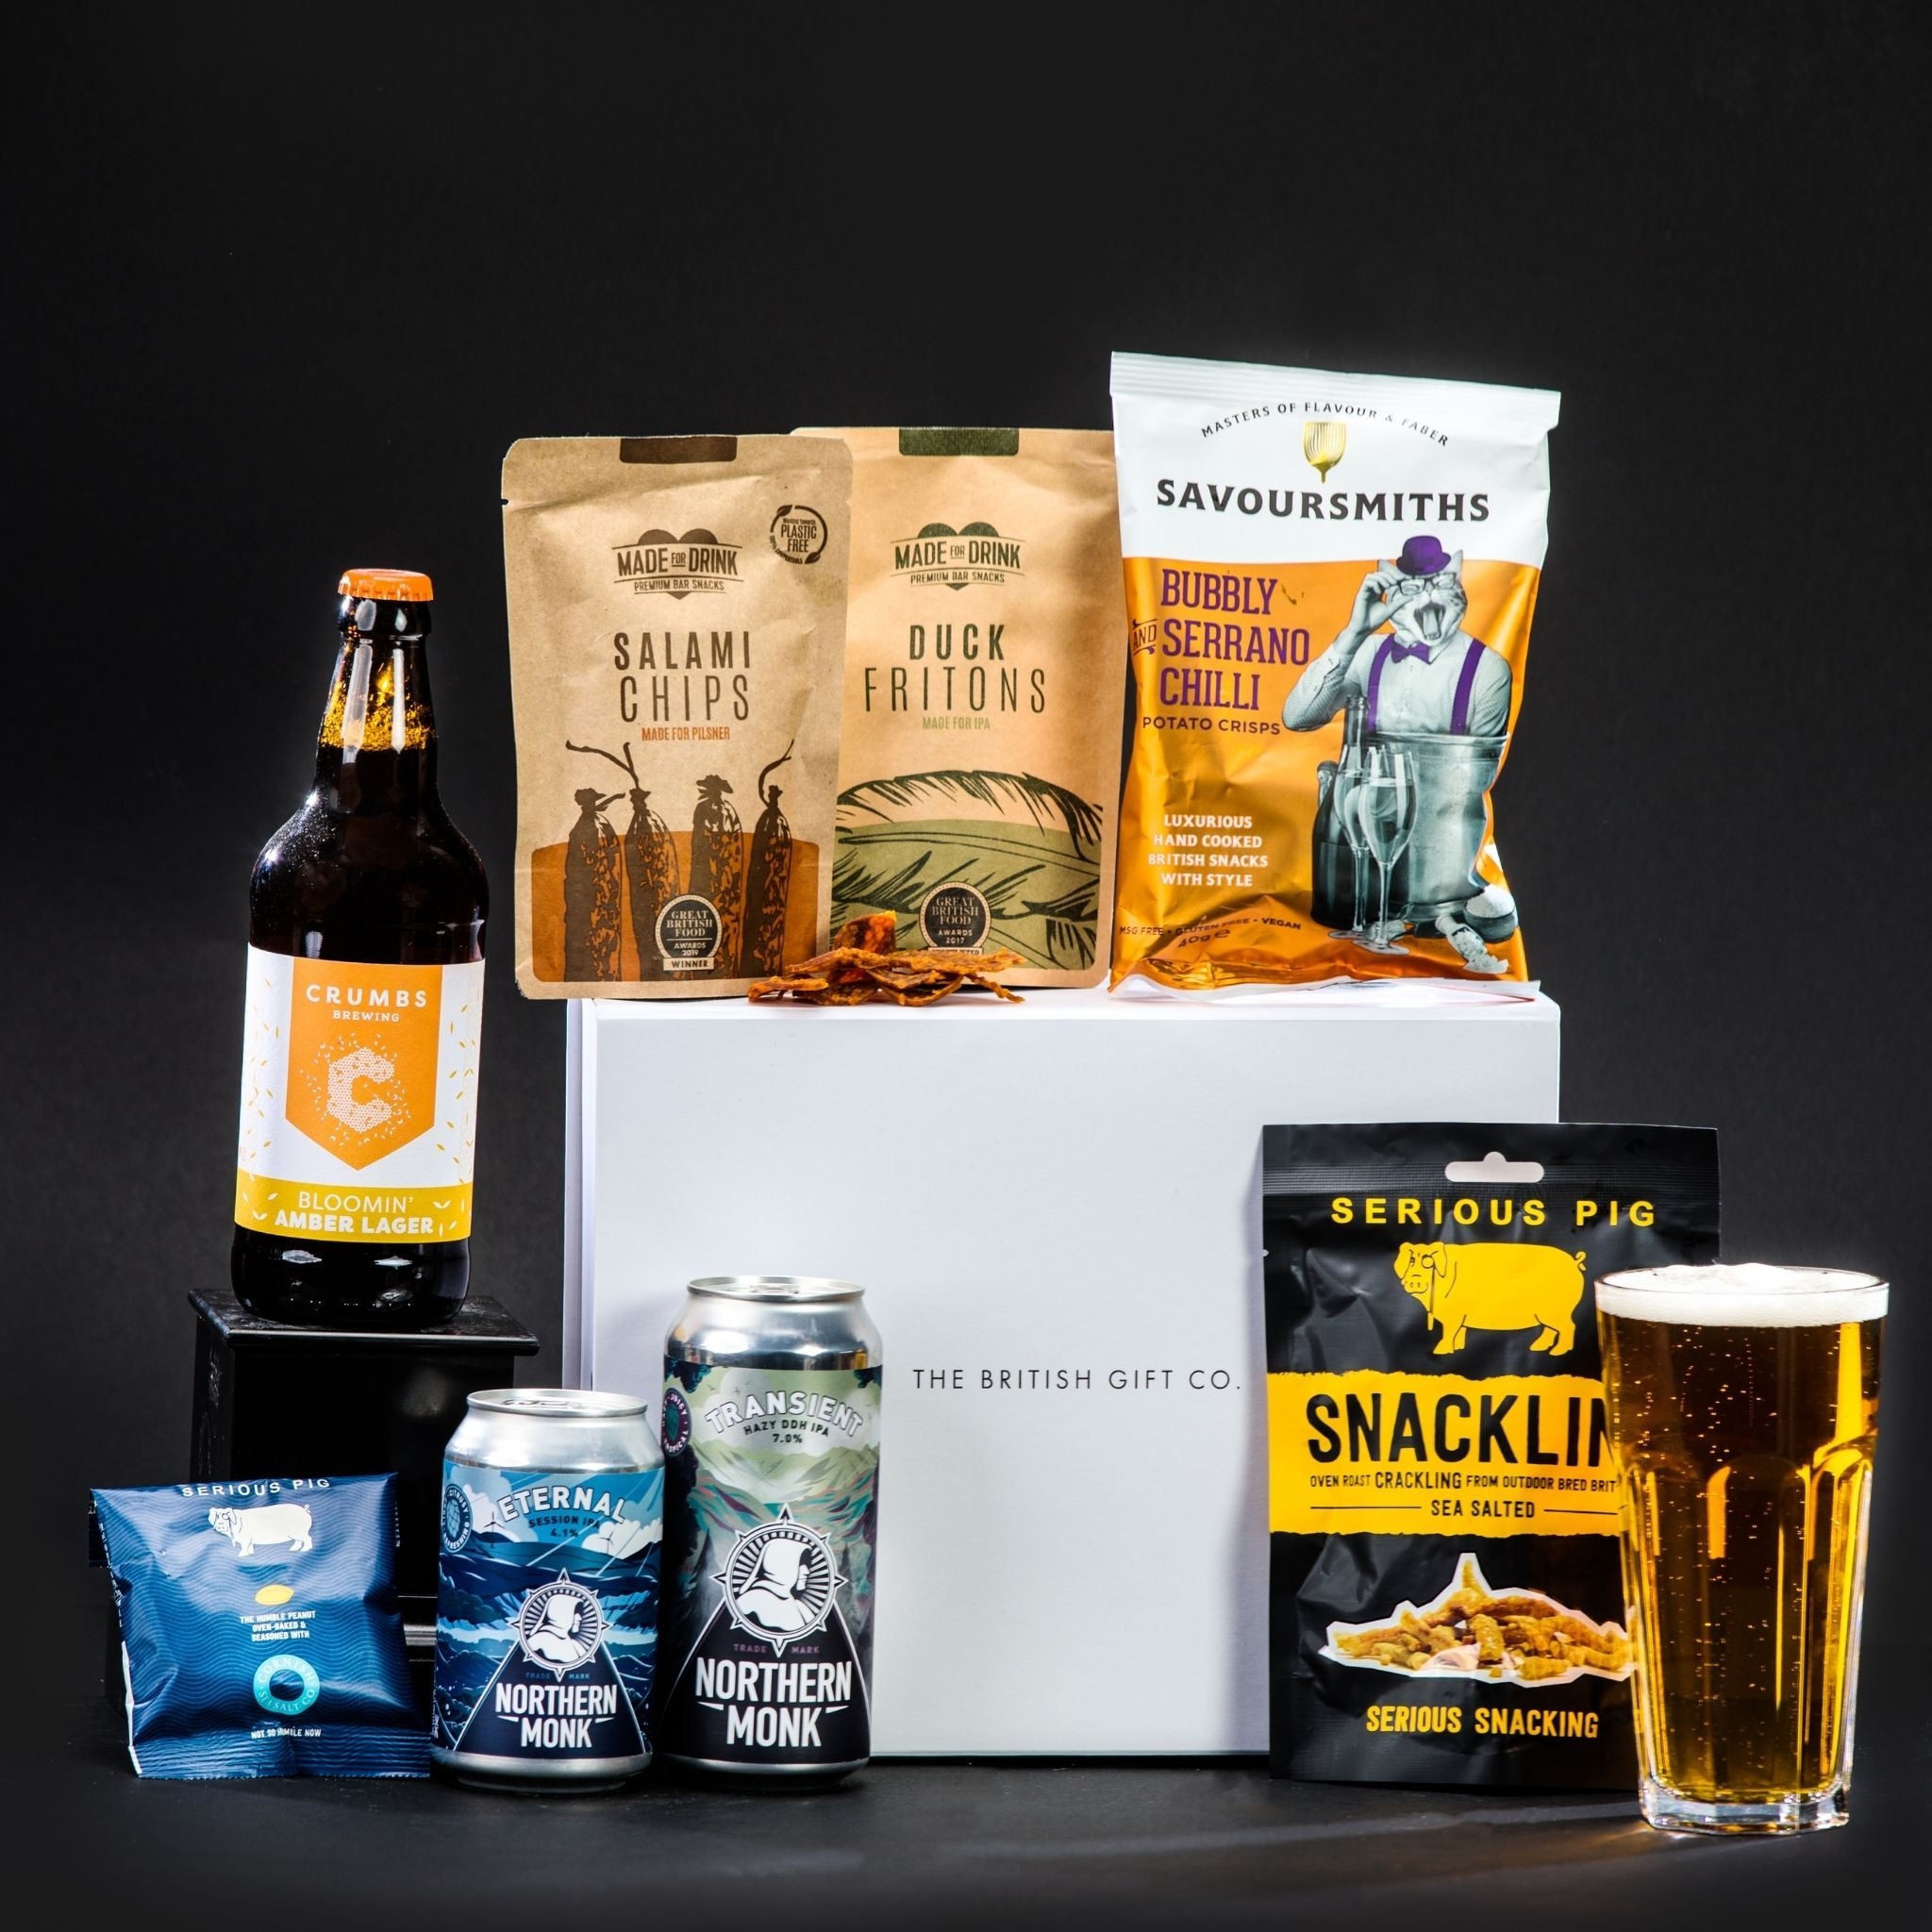 Beer Gift Set with Bar Snacks – Craft Ales from Local British Brewers – The British Gift Co.